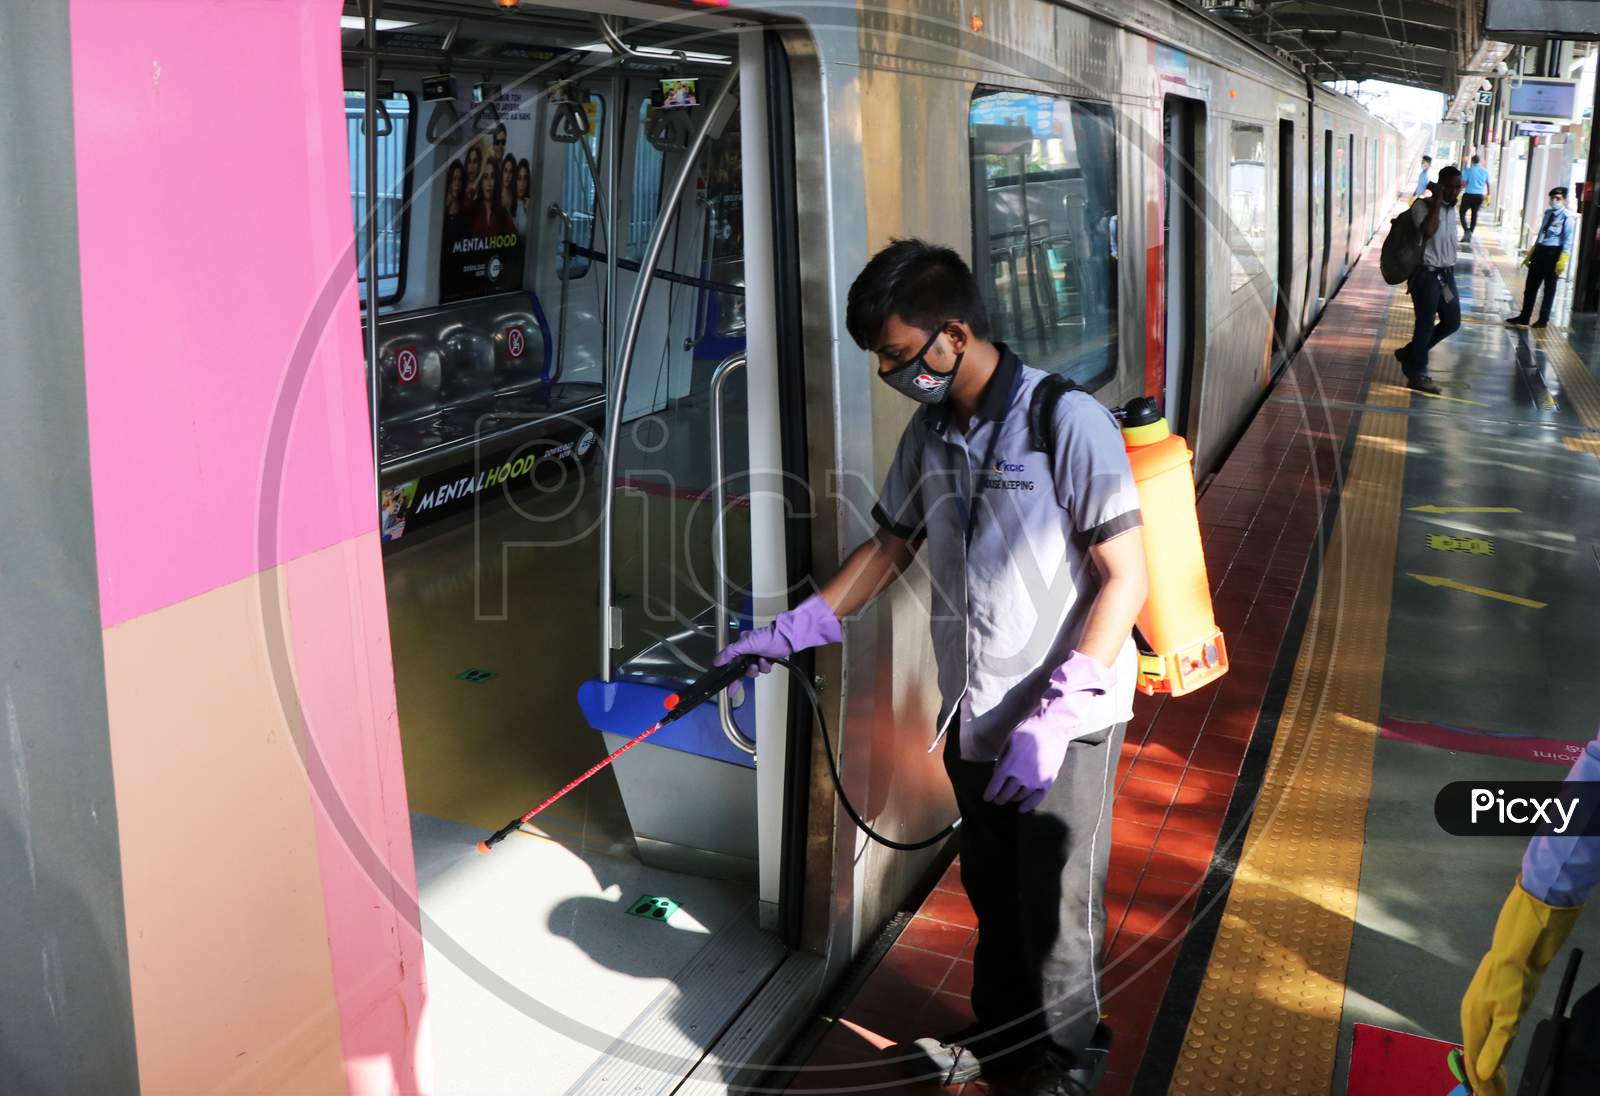 A worker sanitizes a coach as the metro network prepares to resume services after more than a 6-month shutdown due to the Covid-19 coronavirus pandemic, at the Andheri metro station in Mumbai, October, 2020.